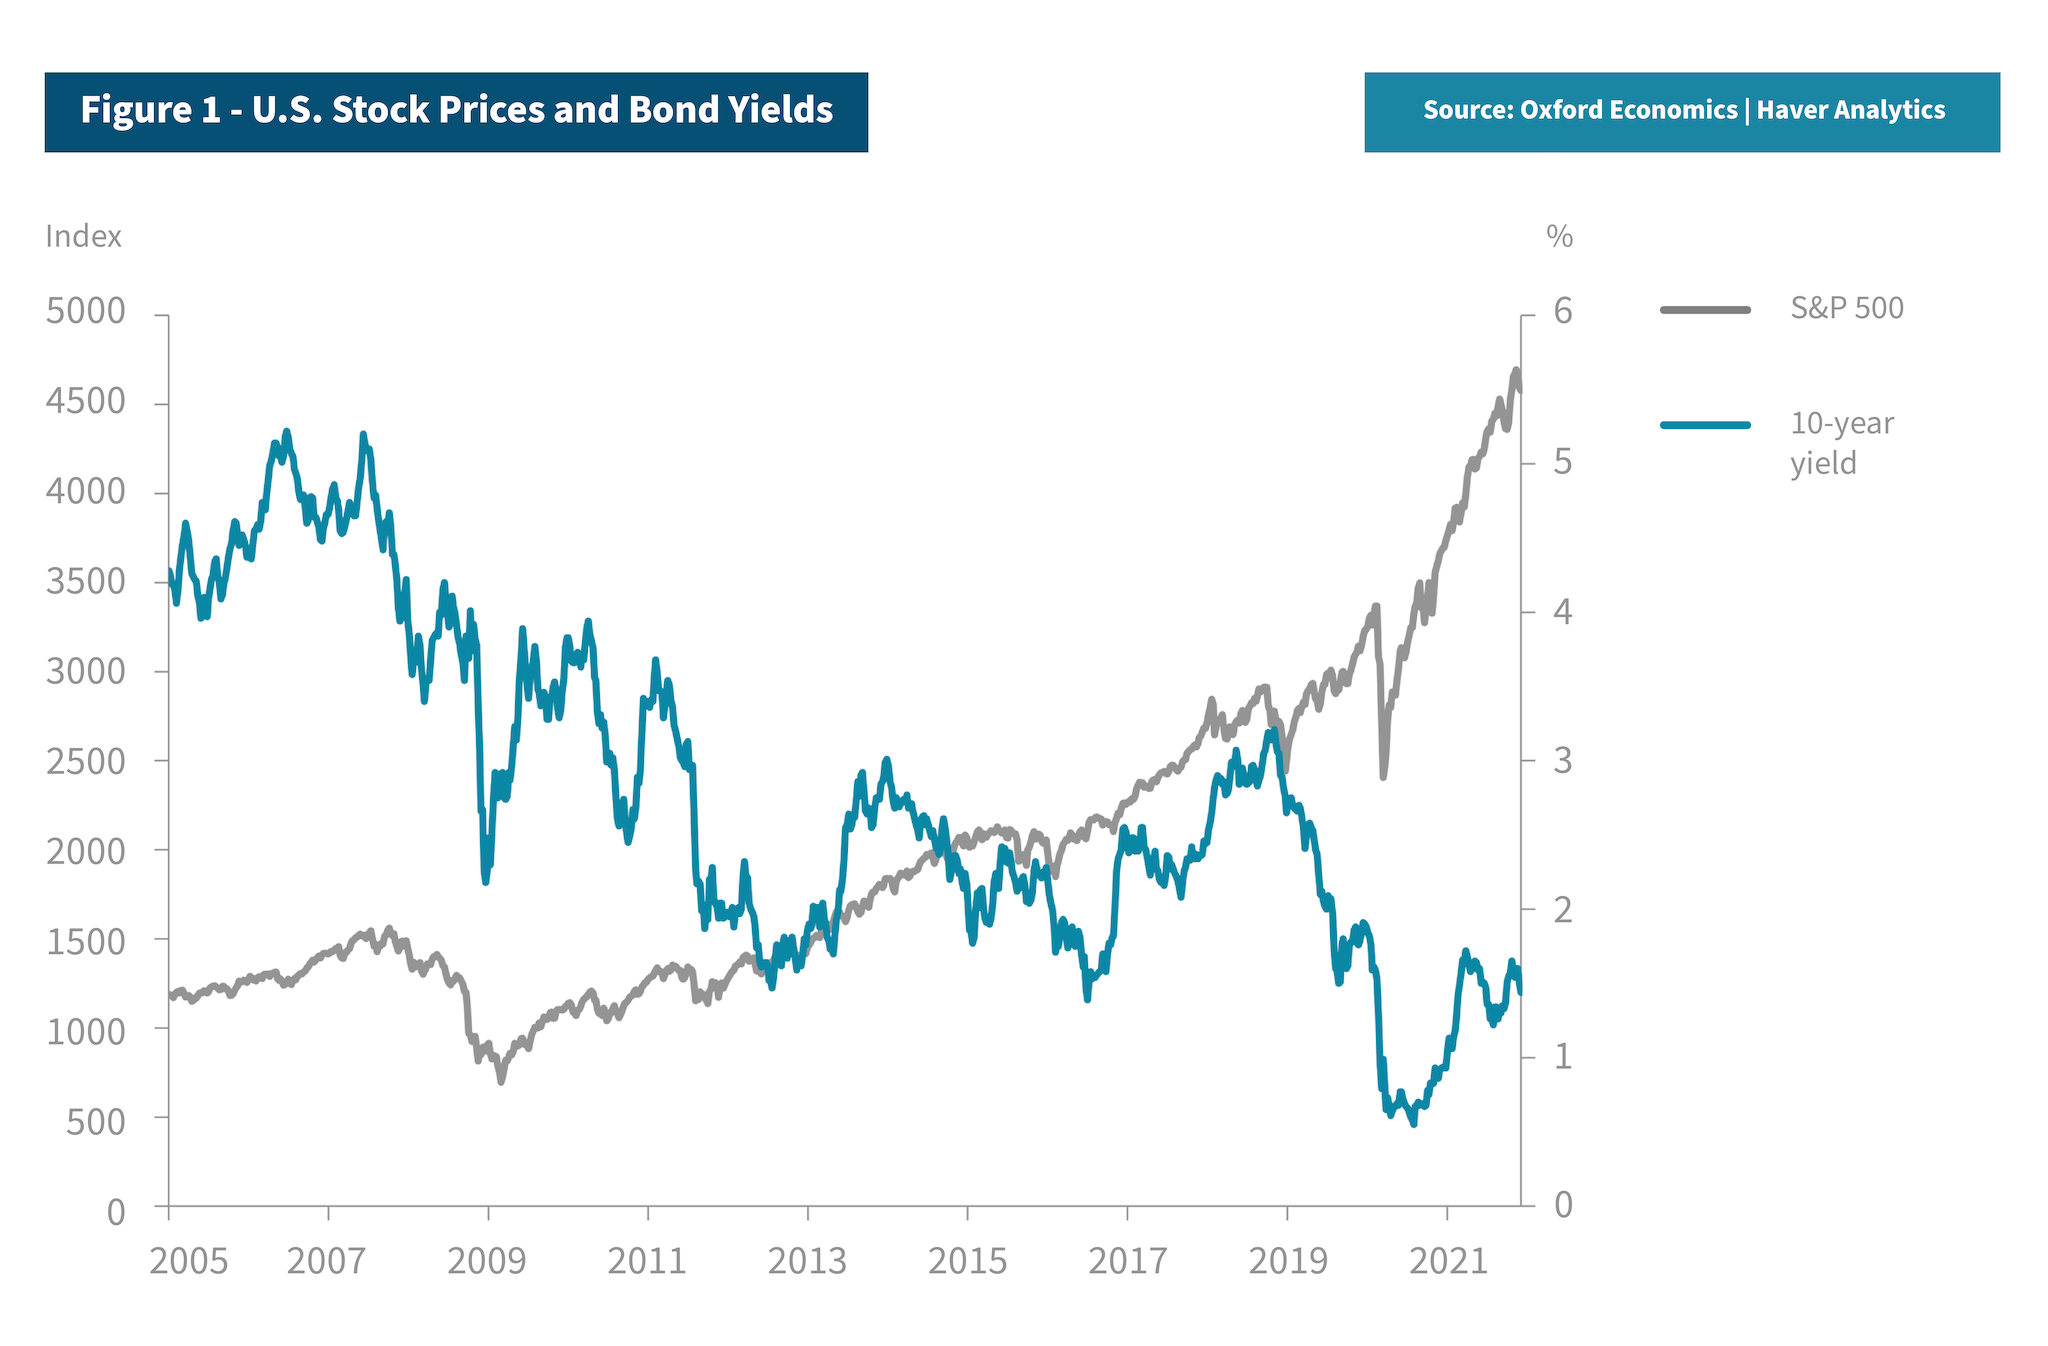 Figure 1: Graph shows U.S. stock prices and bond yields from 2005-2021 to demonstrate the current high valuation environment.